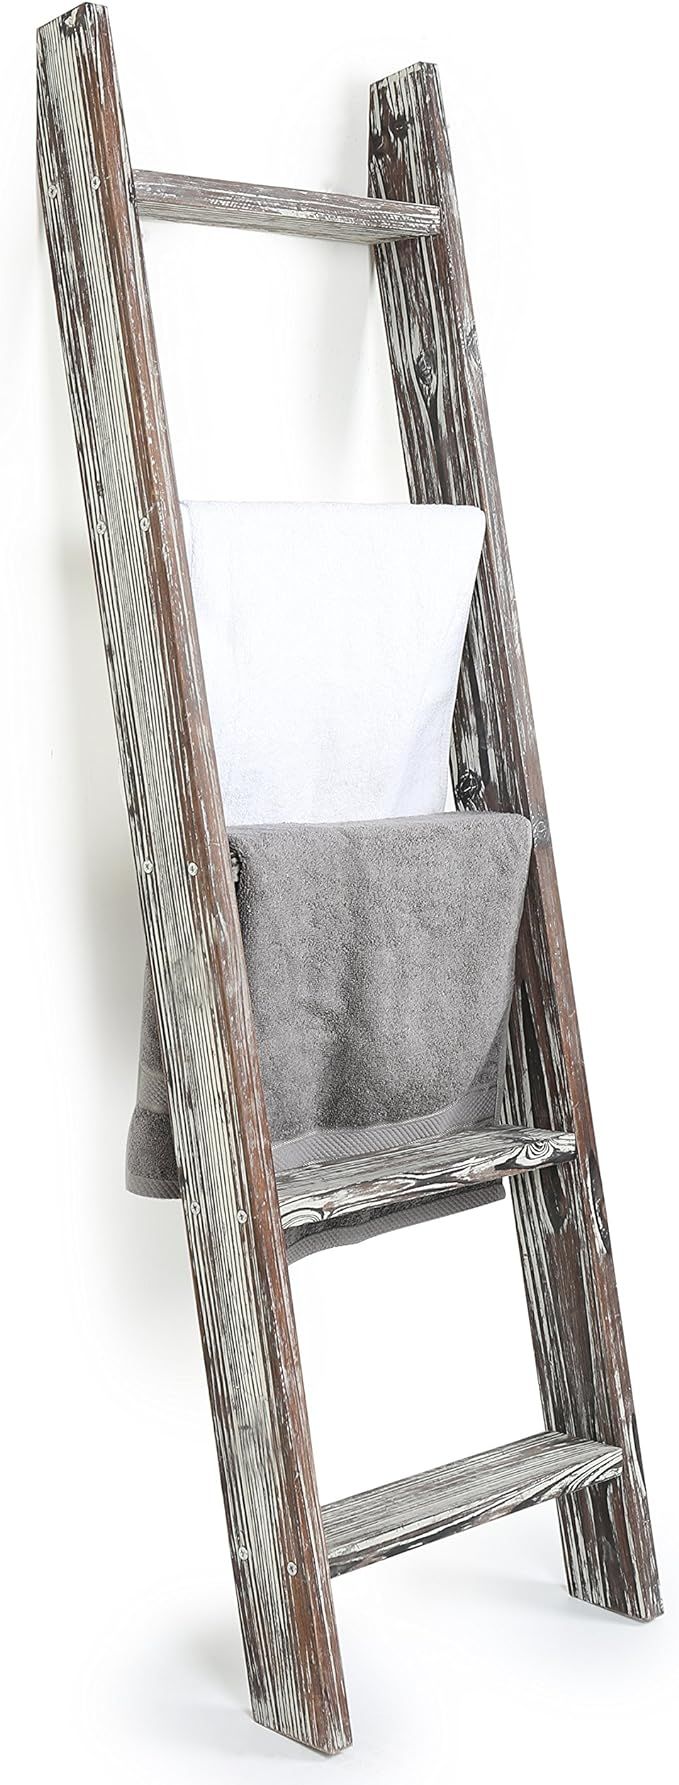 MyGift 4.5-Foot Wall-Leaning Ladder-Style Torched Wood Blanket Rack | Amazon (US)